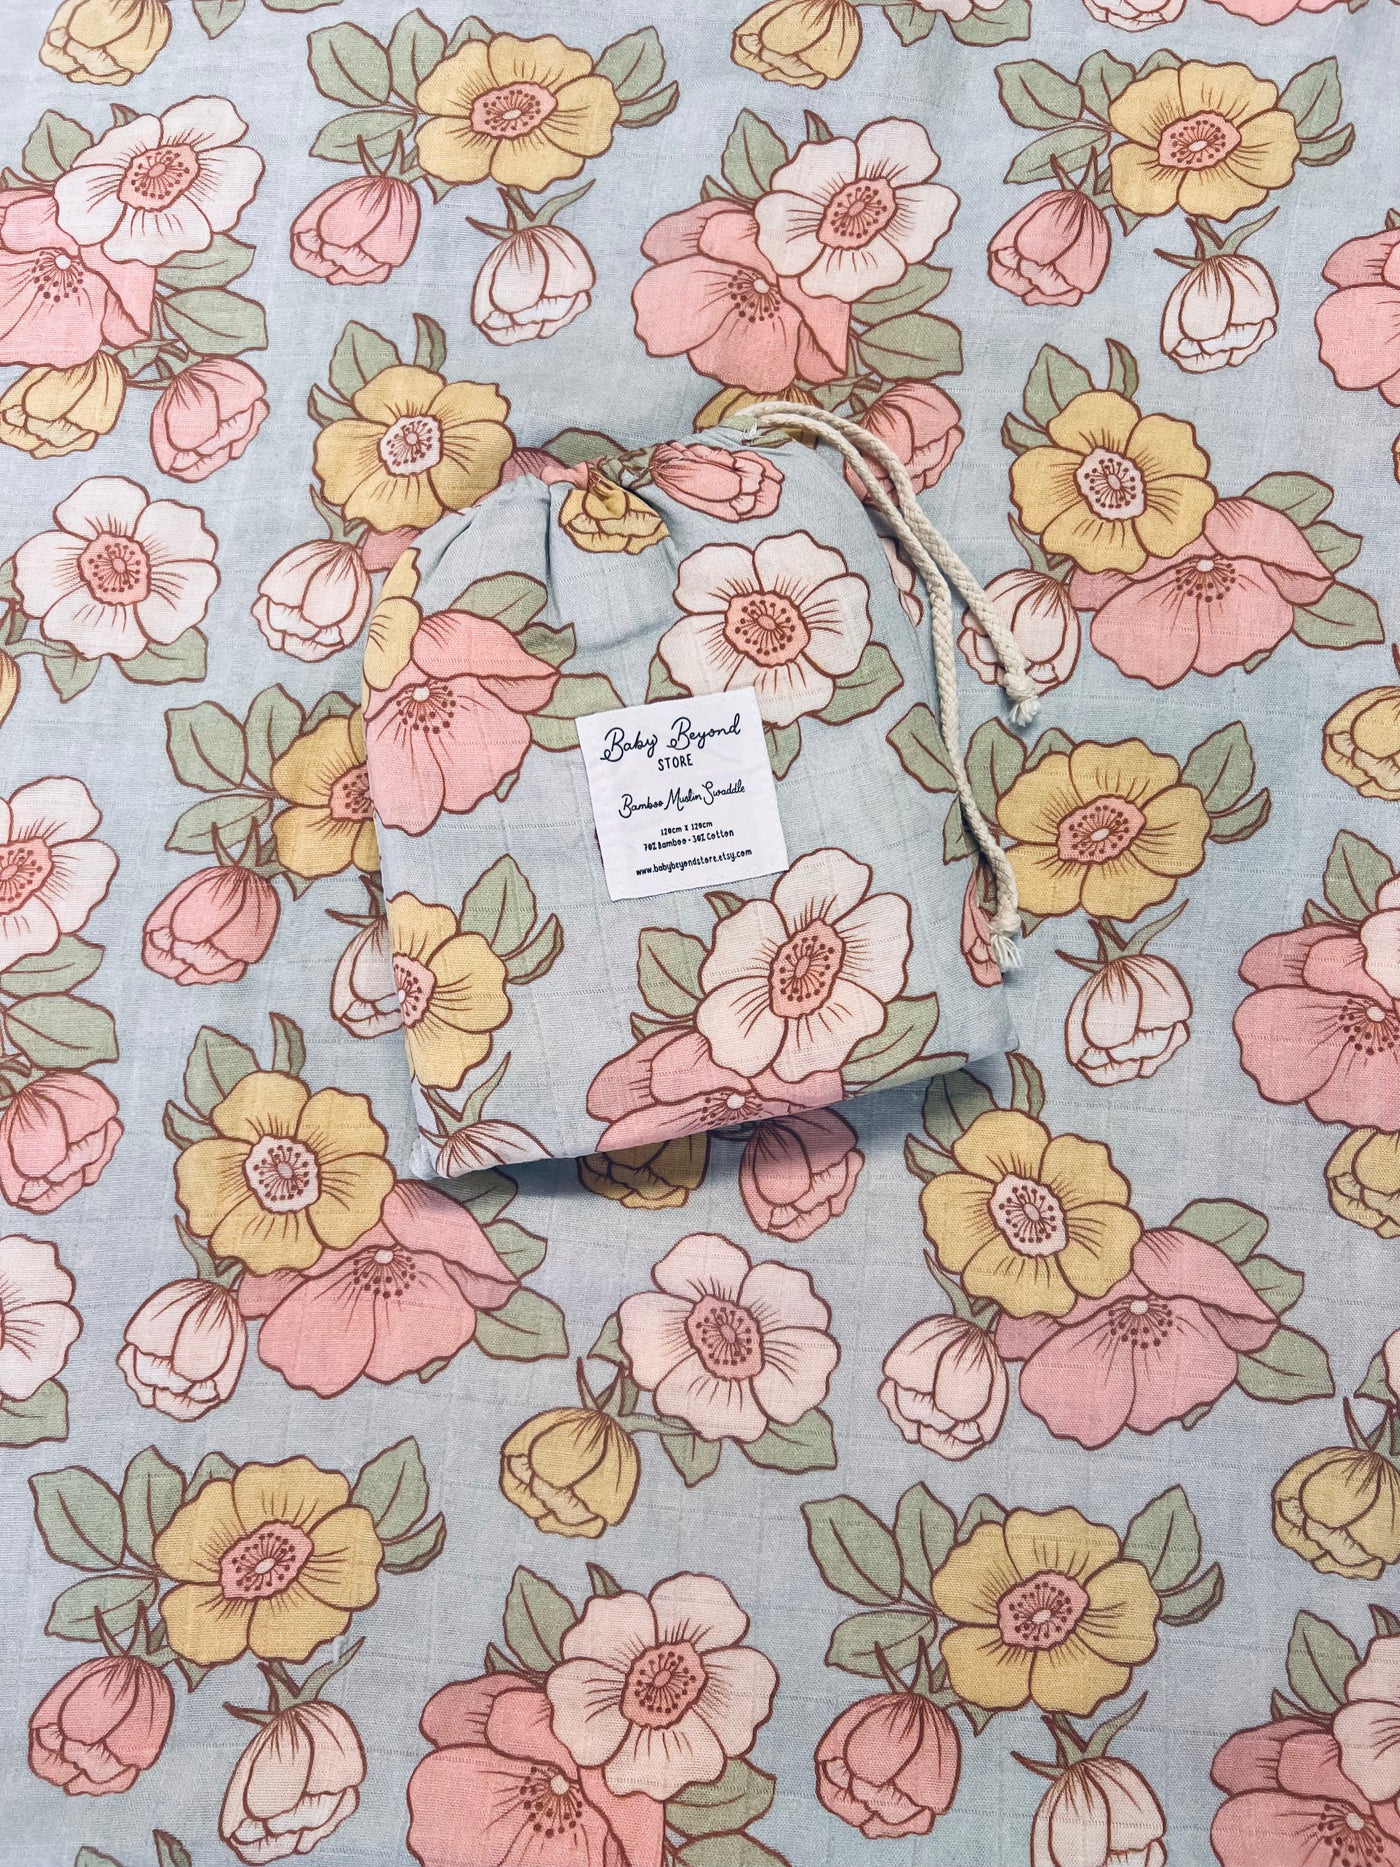 Bamboo Muslin Swaddle - Sweet Floral